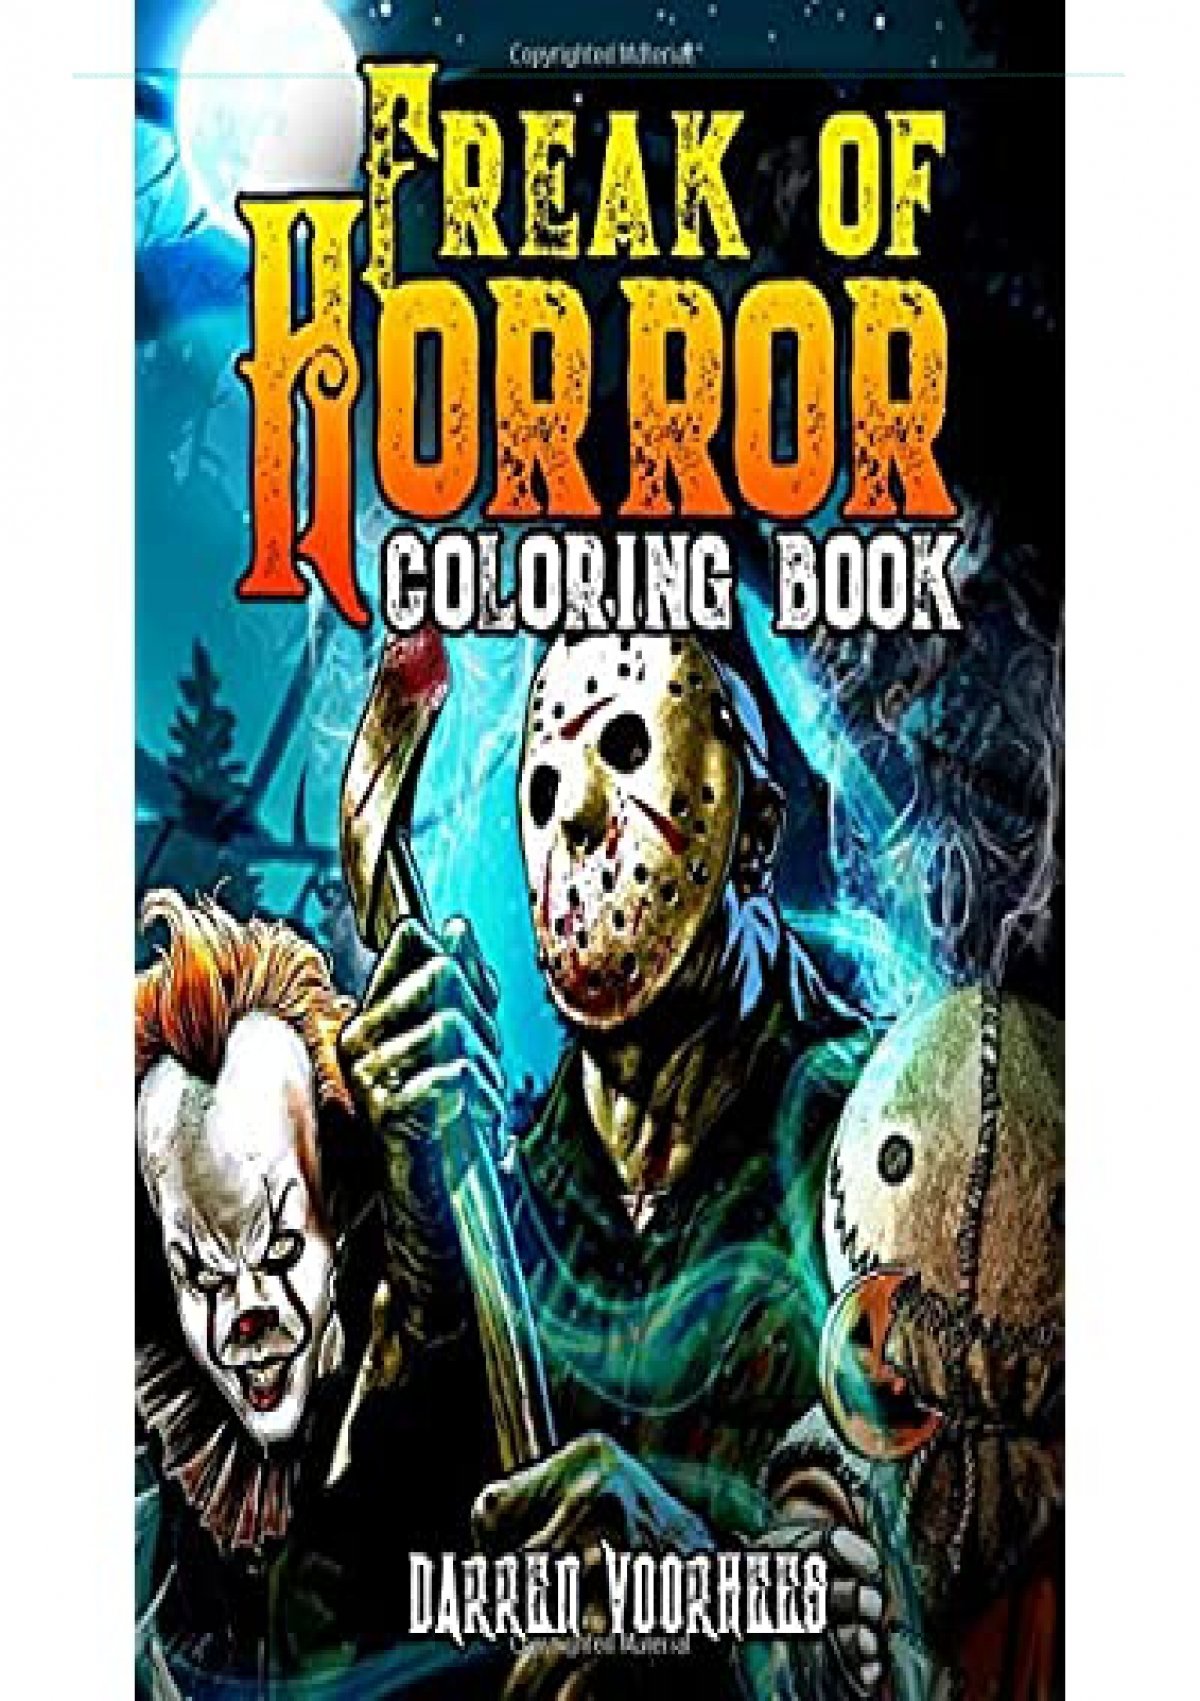 Download Pdf Freak Of Horror Coloring Book Scary Creatures And Creepy Serial Killers From Classic Horror Movies Halloween Holiday Gifts For Adults Kids Kindle